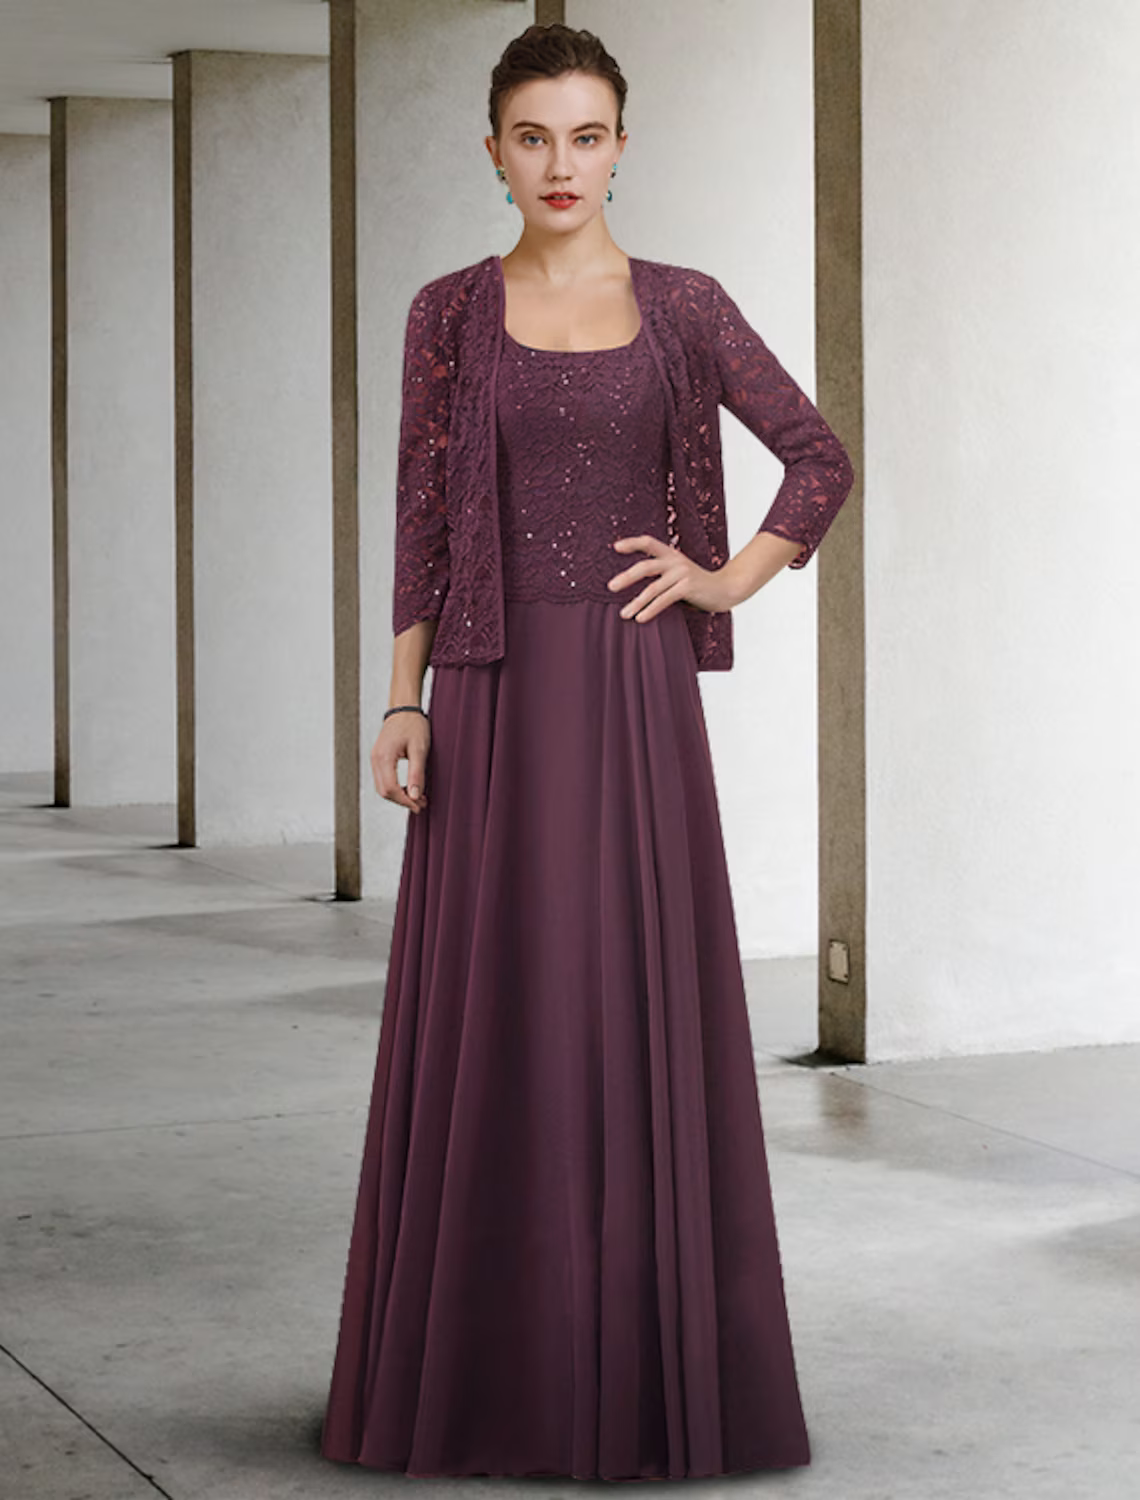 Two Piece A-Line Mother of the Bride Dress Elegant Floor Length Chiffon Lace Half Sleeve with Pleats